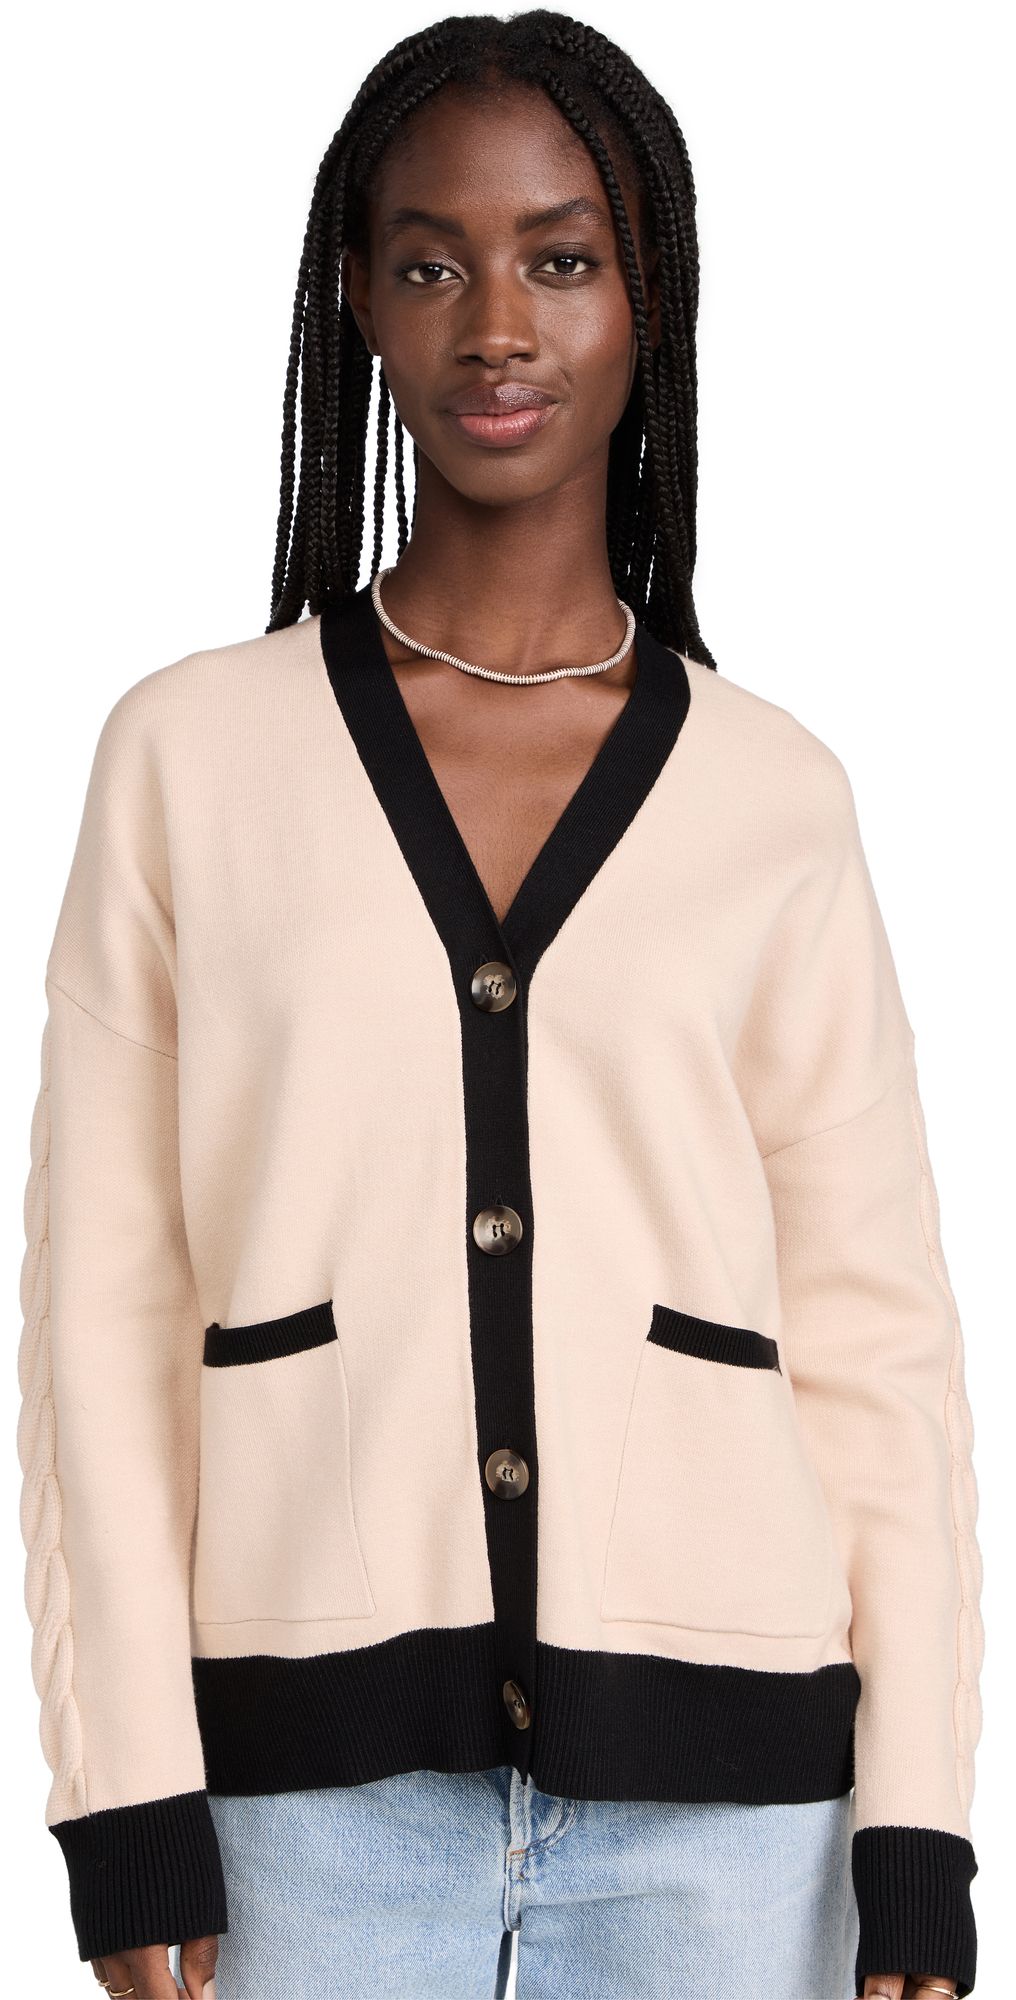 Supersoft Sweater Knit Colorblock Cardigan | Shopbop